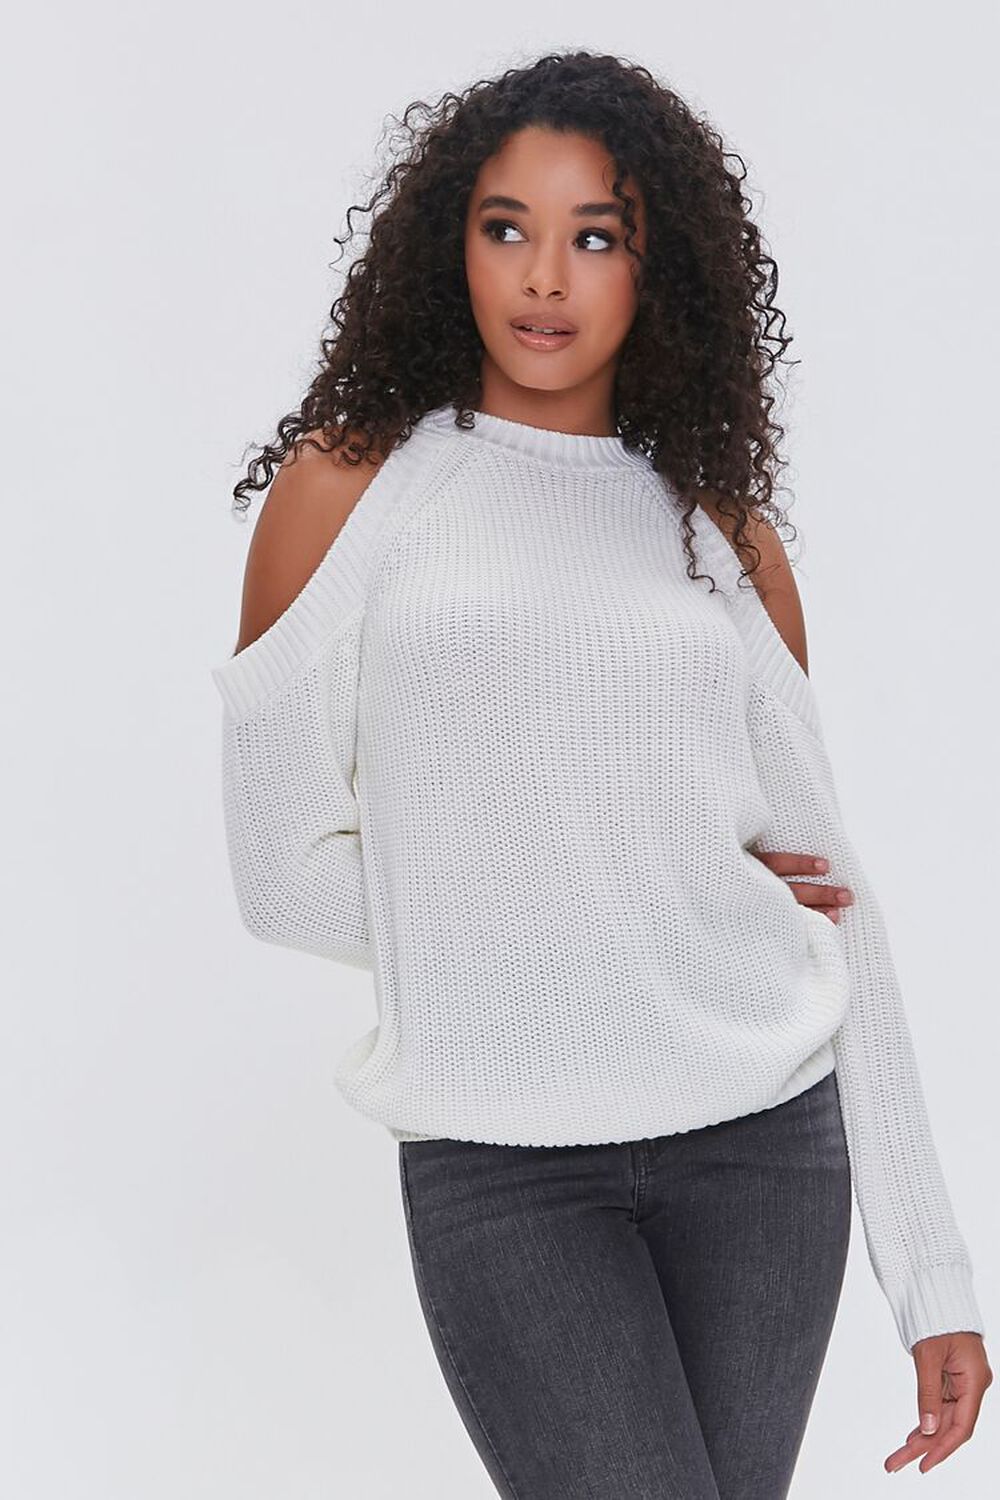 CREAM Ribbed Open-Shoulder Sweater, image 1